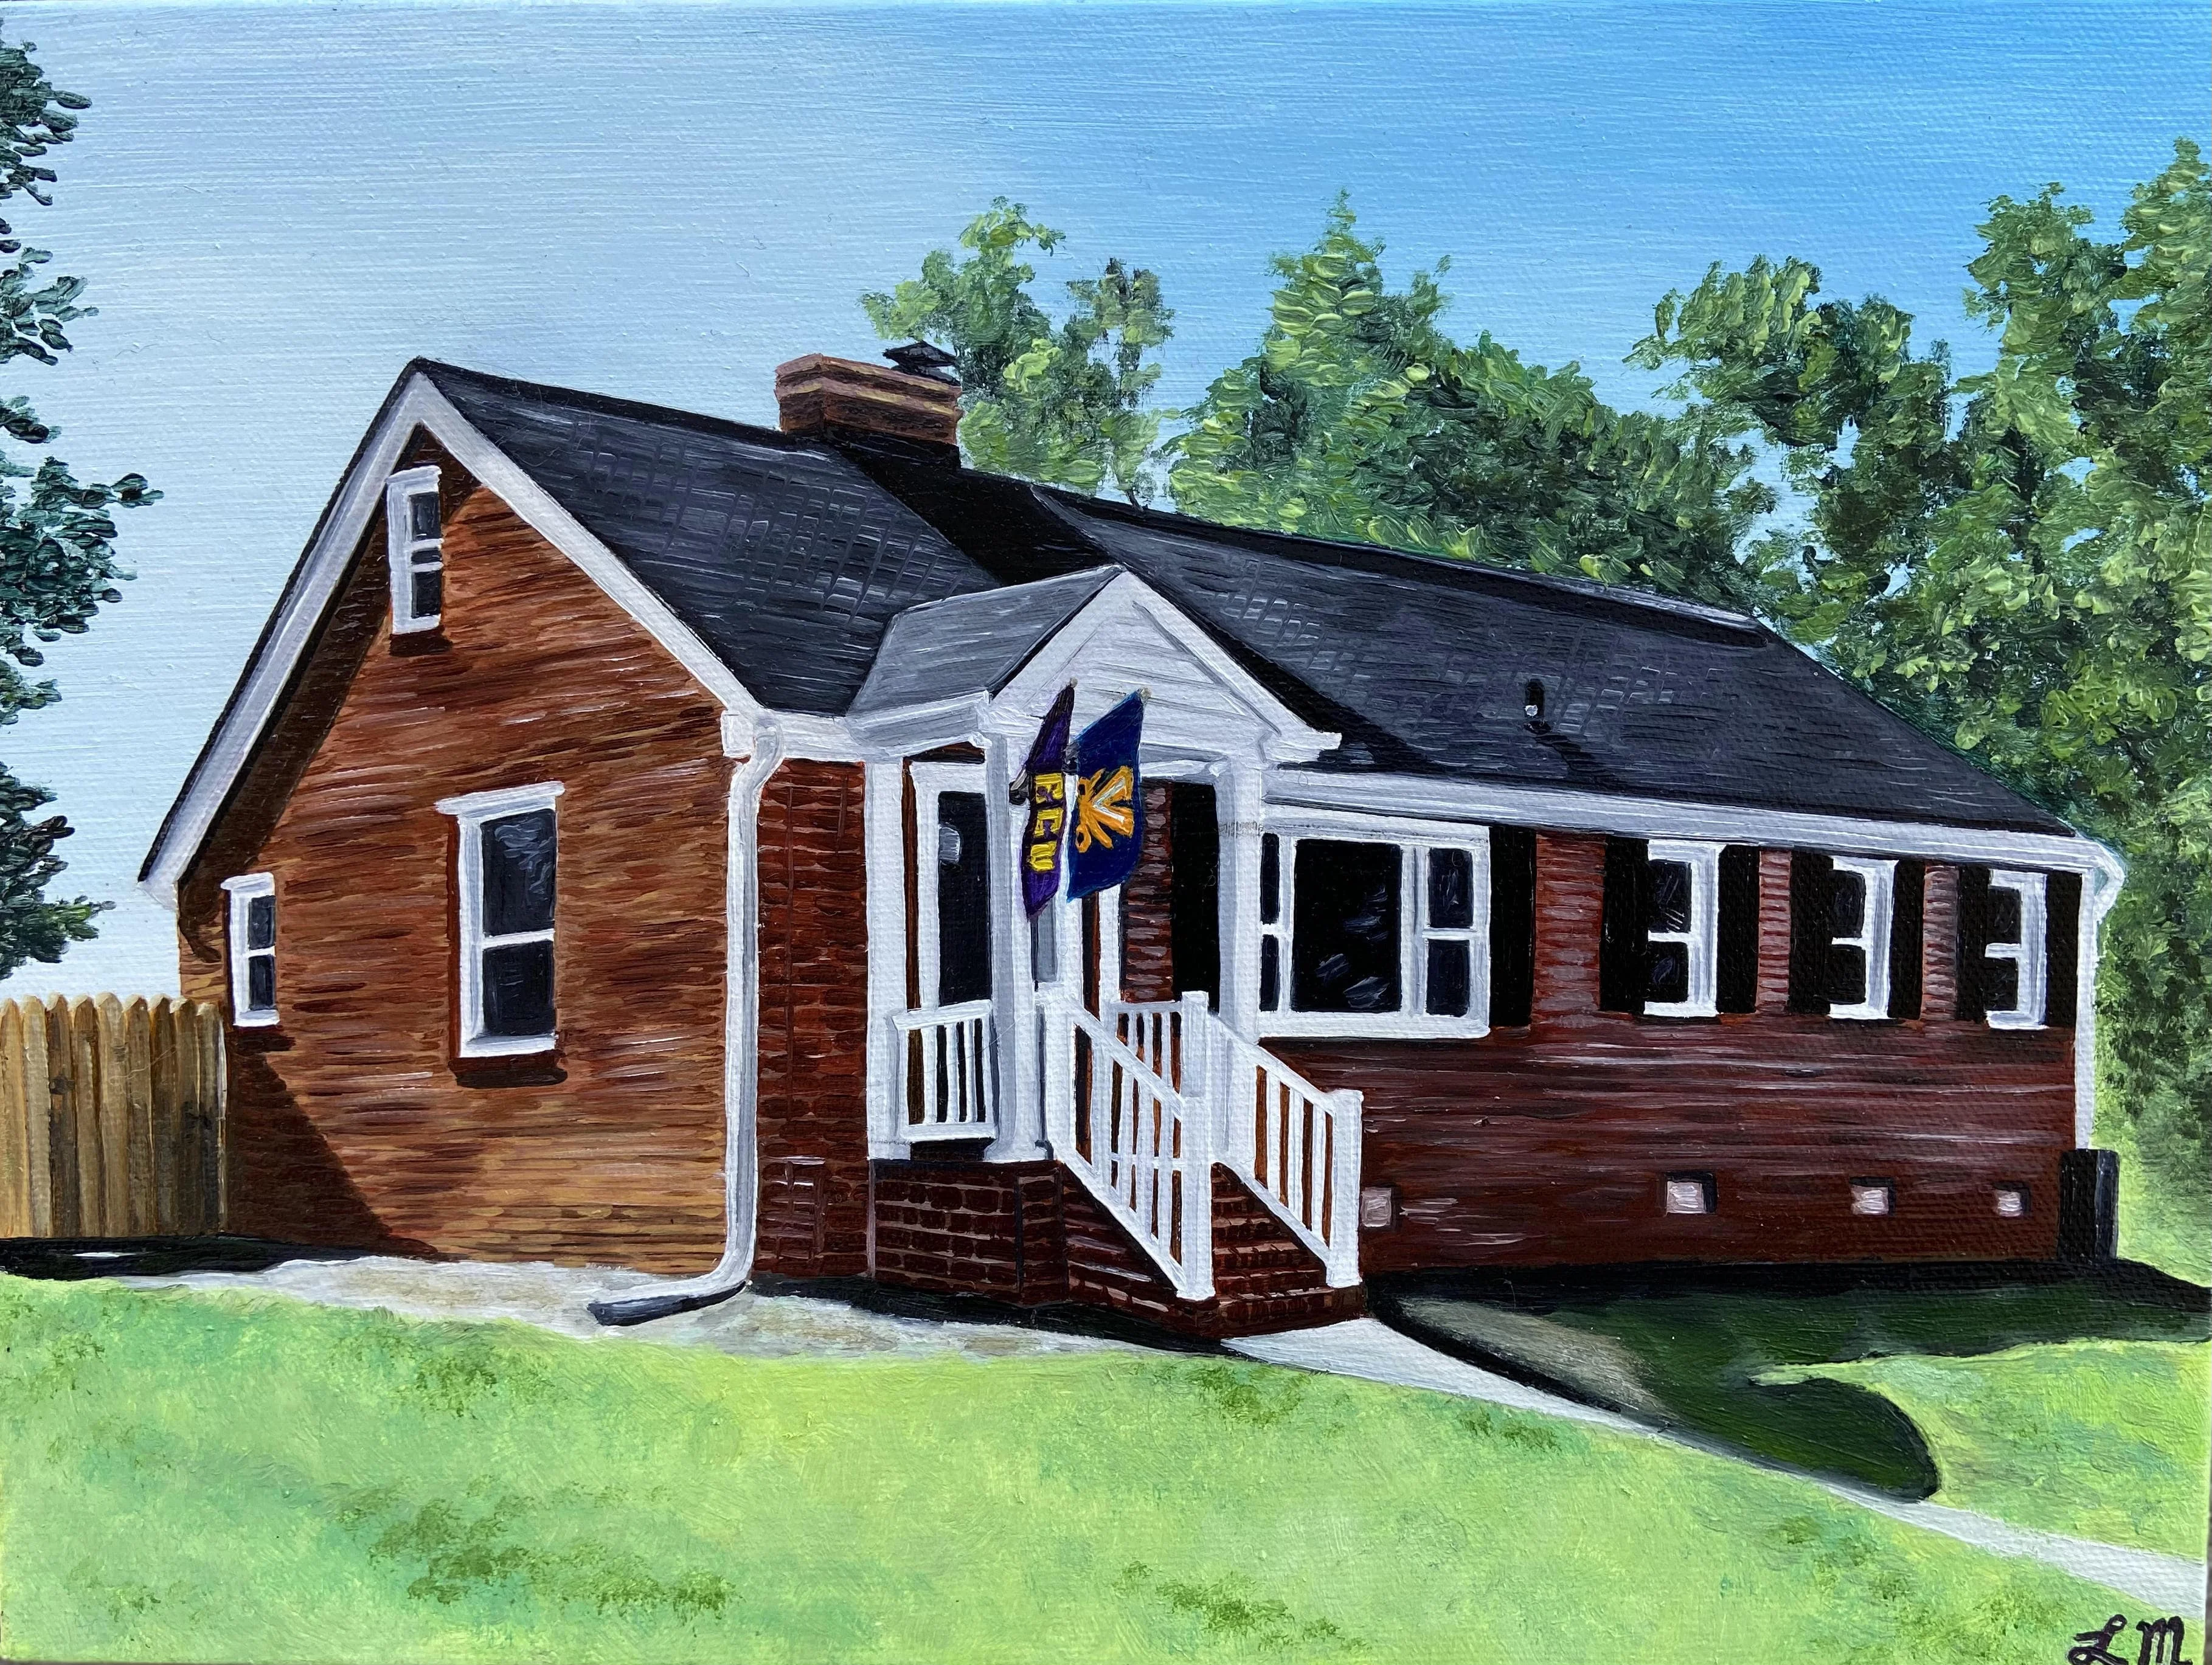 Oil painting of a house